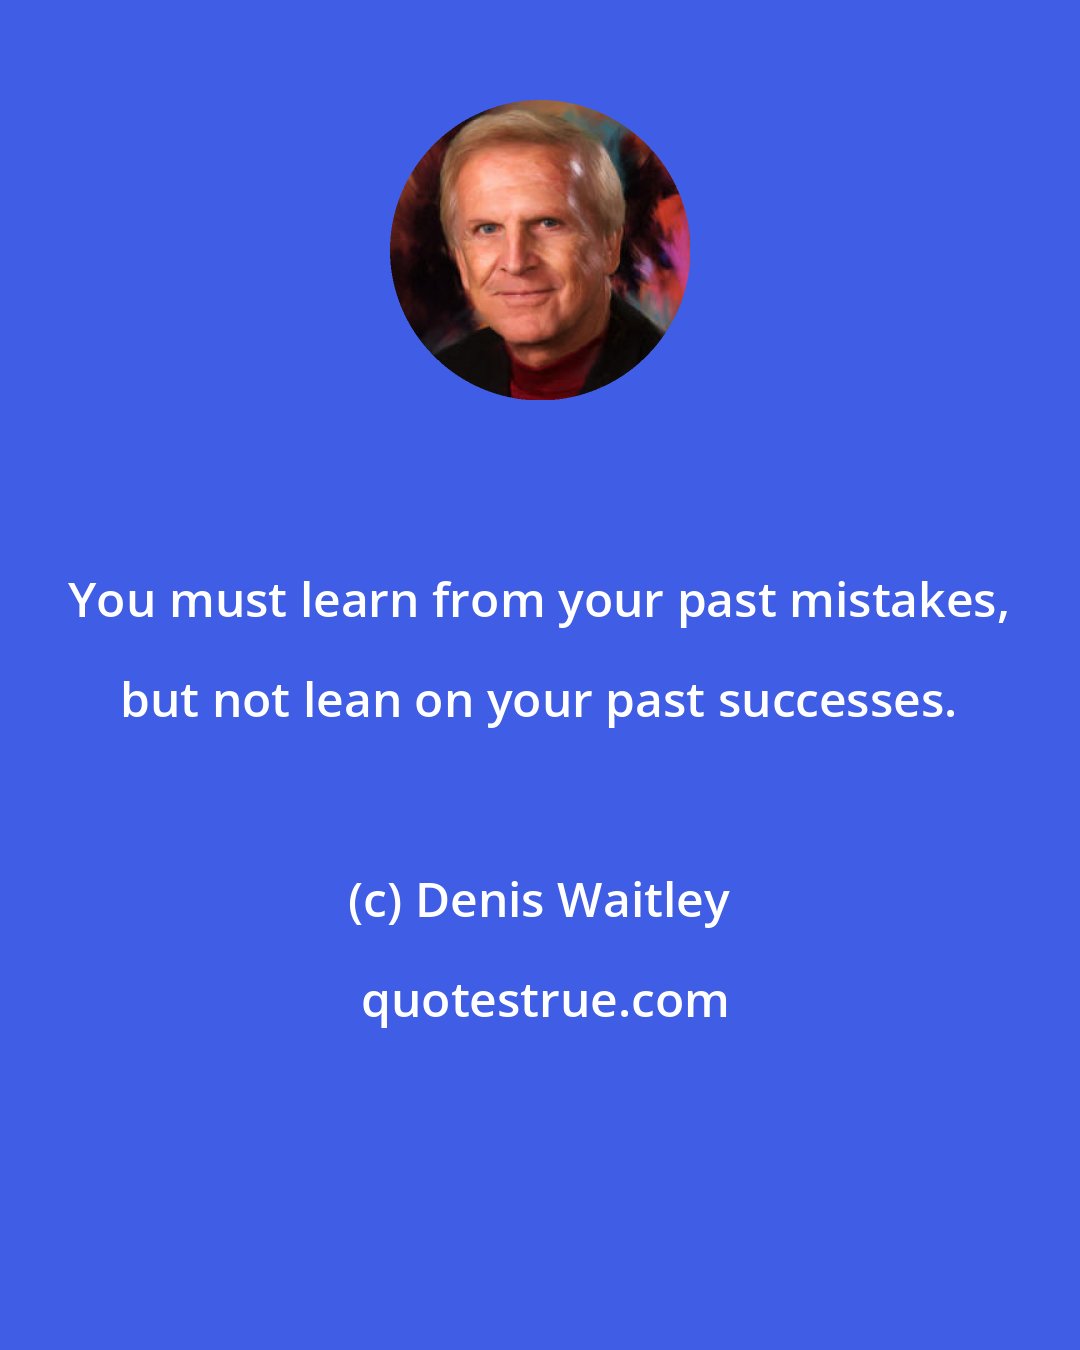 Denis Waitley: You must learn from your past mistakes, but not lean on your past successes.